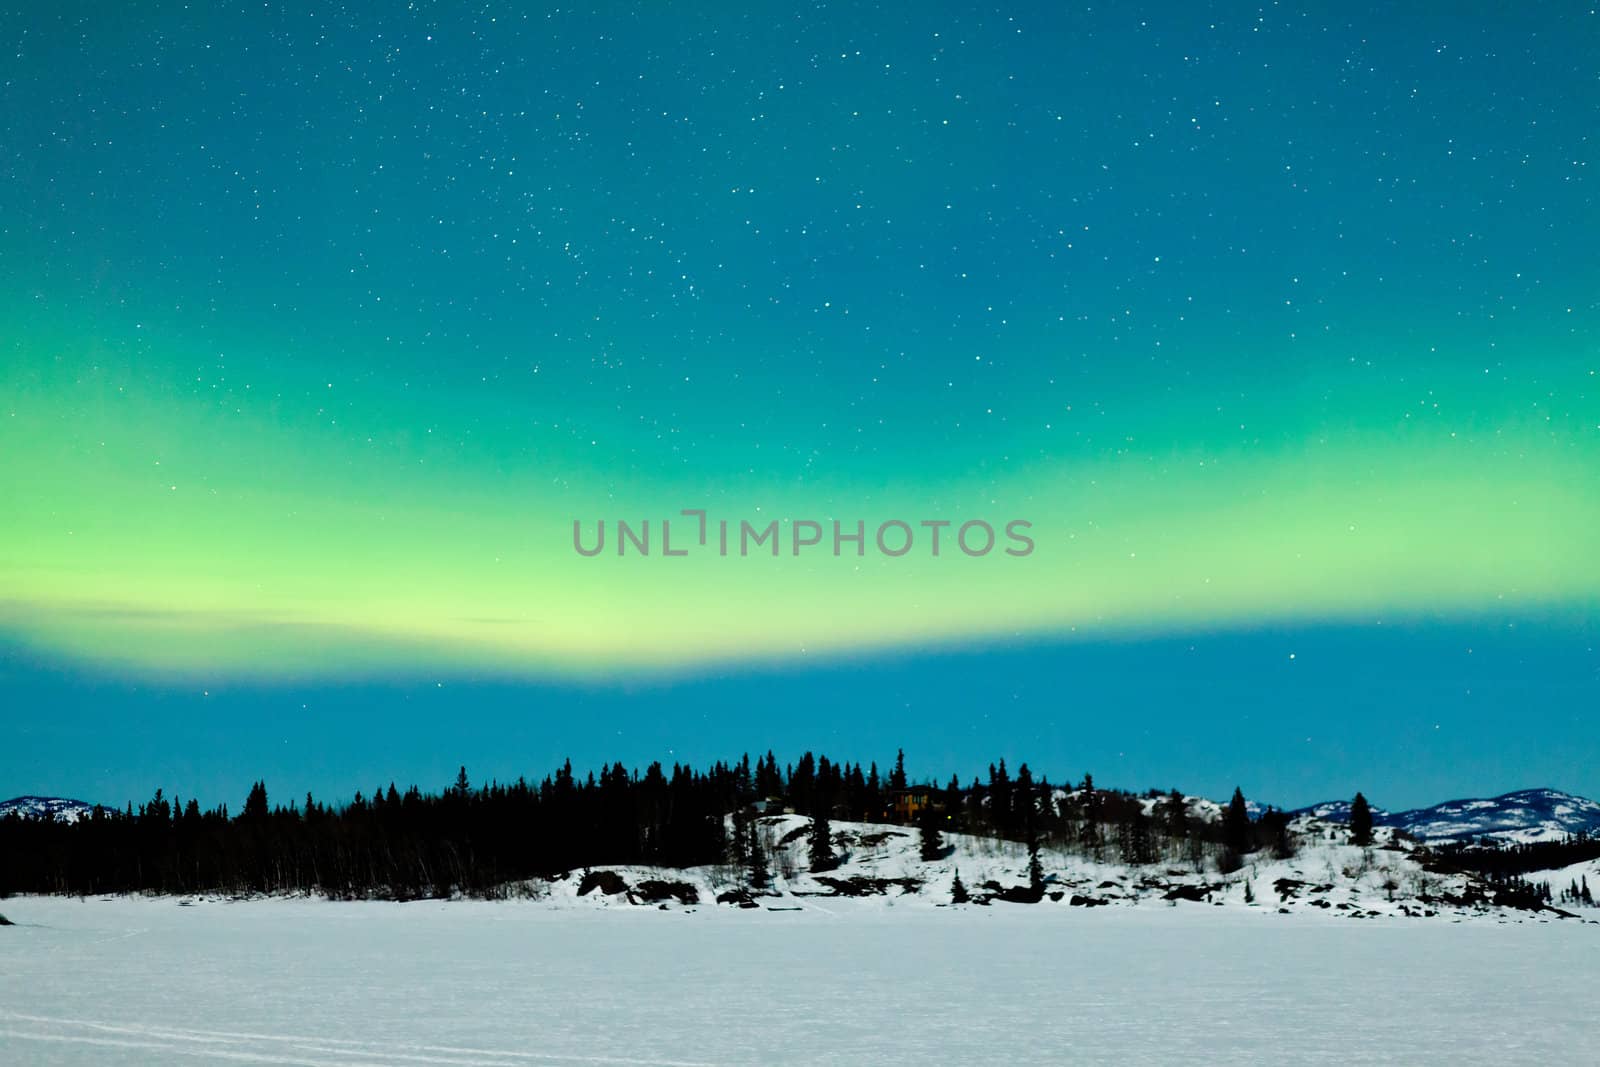 Spectacular display of intense green Northern Lights or Aurora borealis or polar lights over snowy northern winter landscape